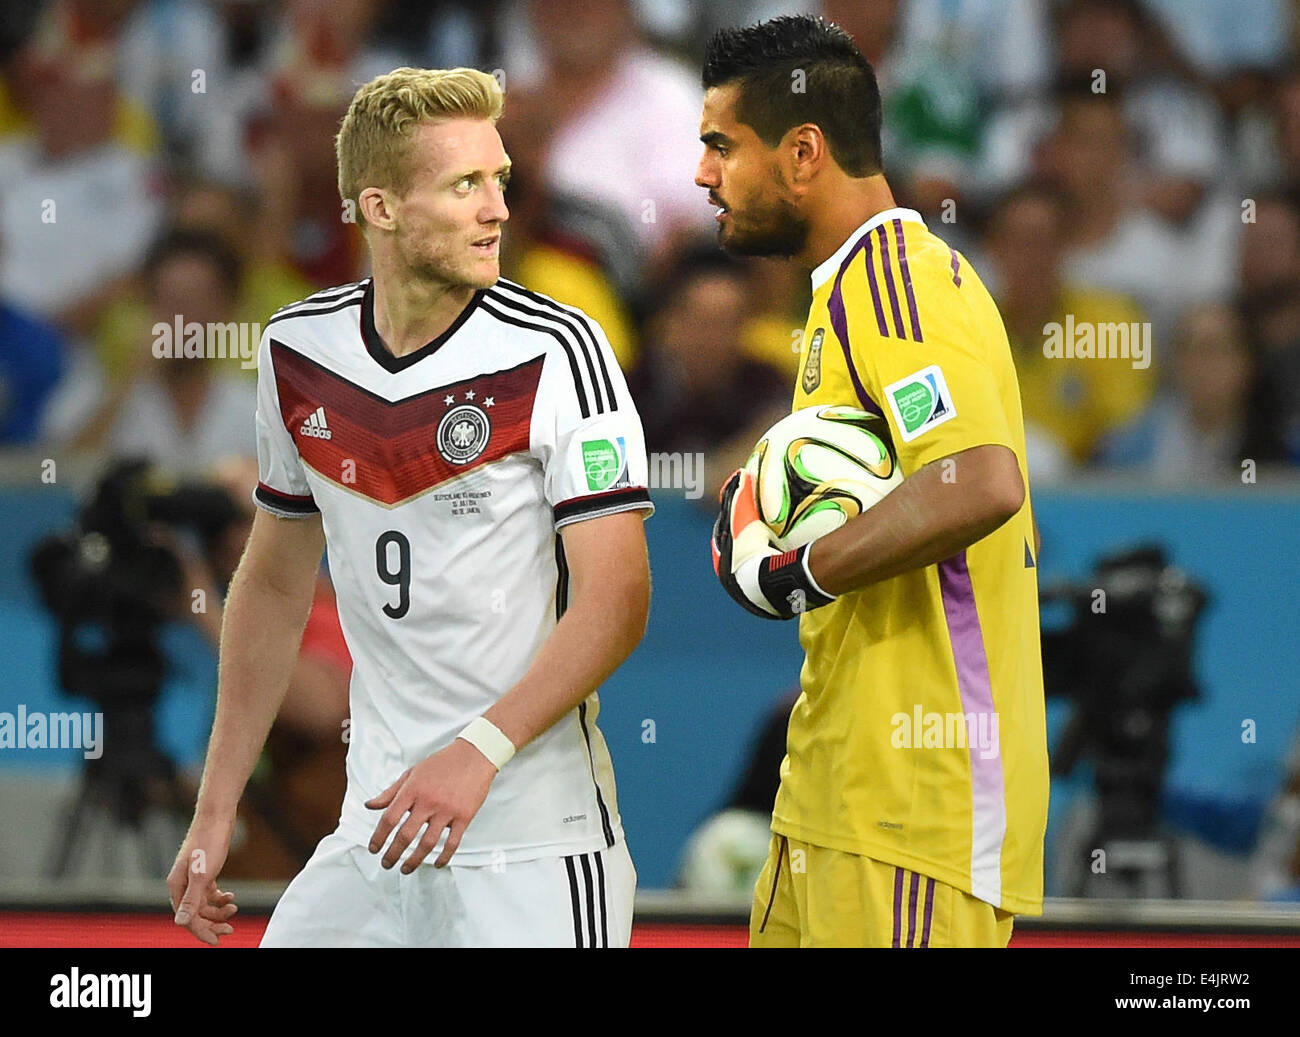 Rio de Janeiro, Brazil. 13th July, 2014. Goalkeeper Sergio Romero (R) of Argentina talks to Andre Schuerrle (L) of Germany during the FIFA World Cup 2014 final soccer match between Germany and Argentina at the Estadio do Maracana in Rio de Janeiro, Brazil, 13 July 2014. Photo: Marcus Brandt/dpa/Alamy Live News Stock Photo